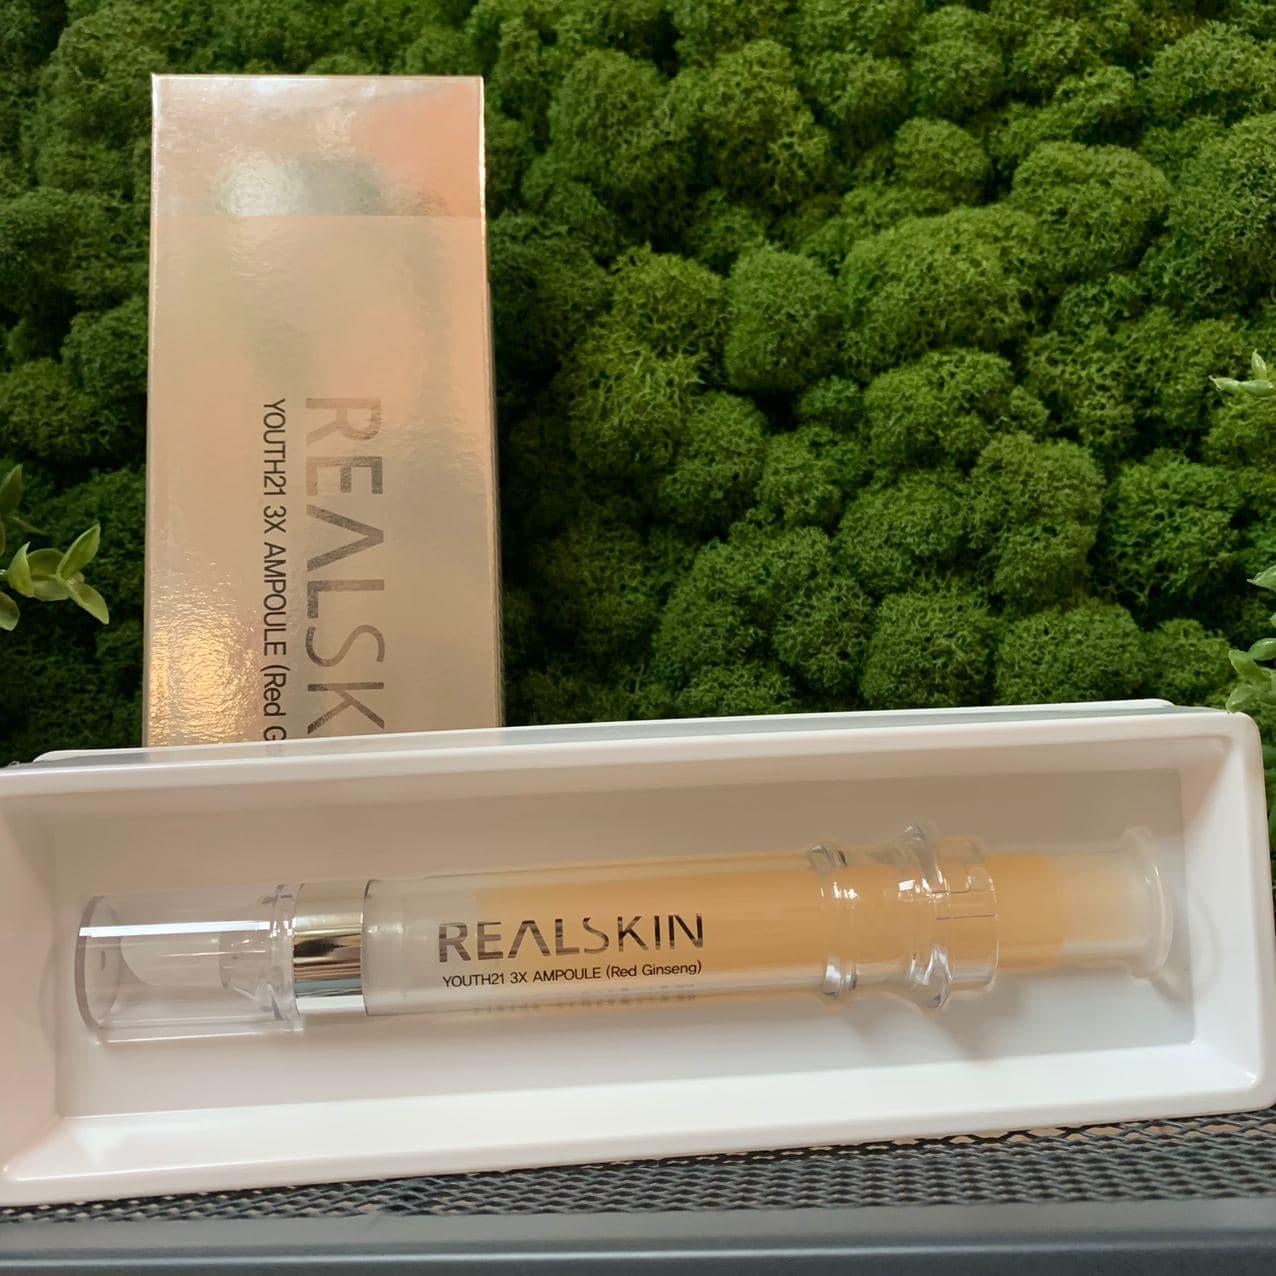 Сыворотка для лица REALSKIN Youth21 3X Ampoule (Red ginseng), 12 мл. - фото 1 - id-p151815189